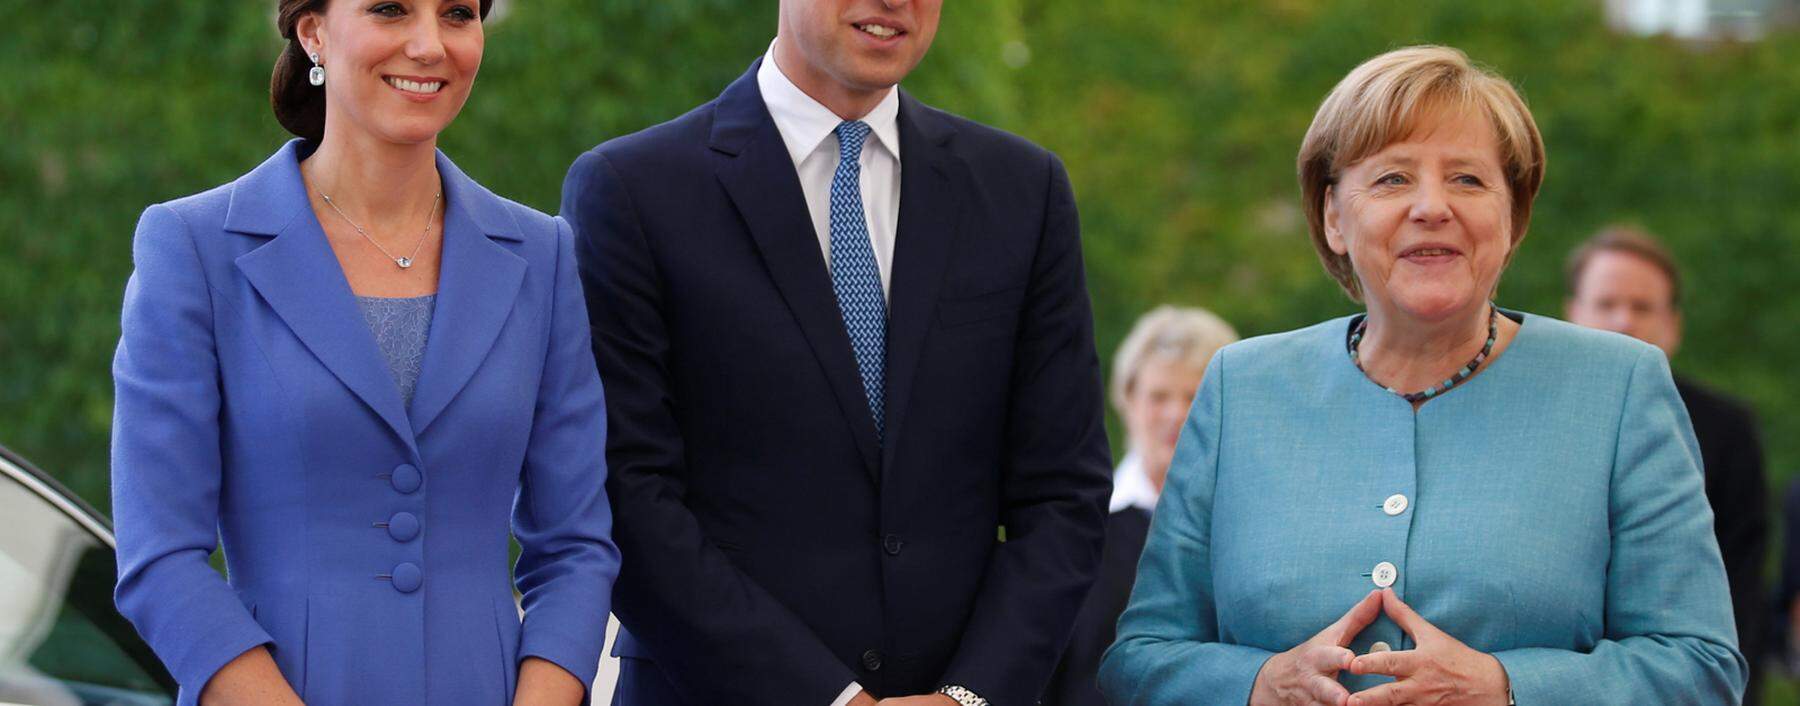 Prince William and his wife Catherine visit Germany